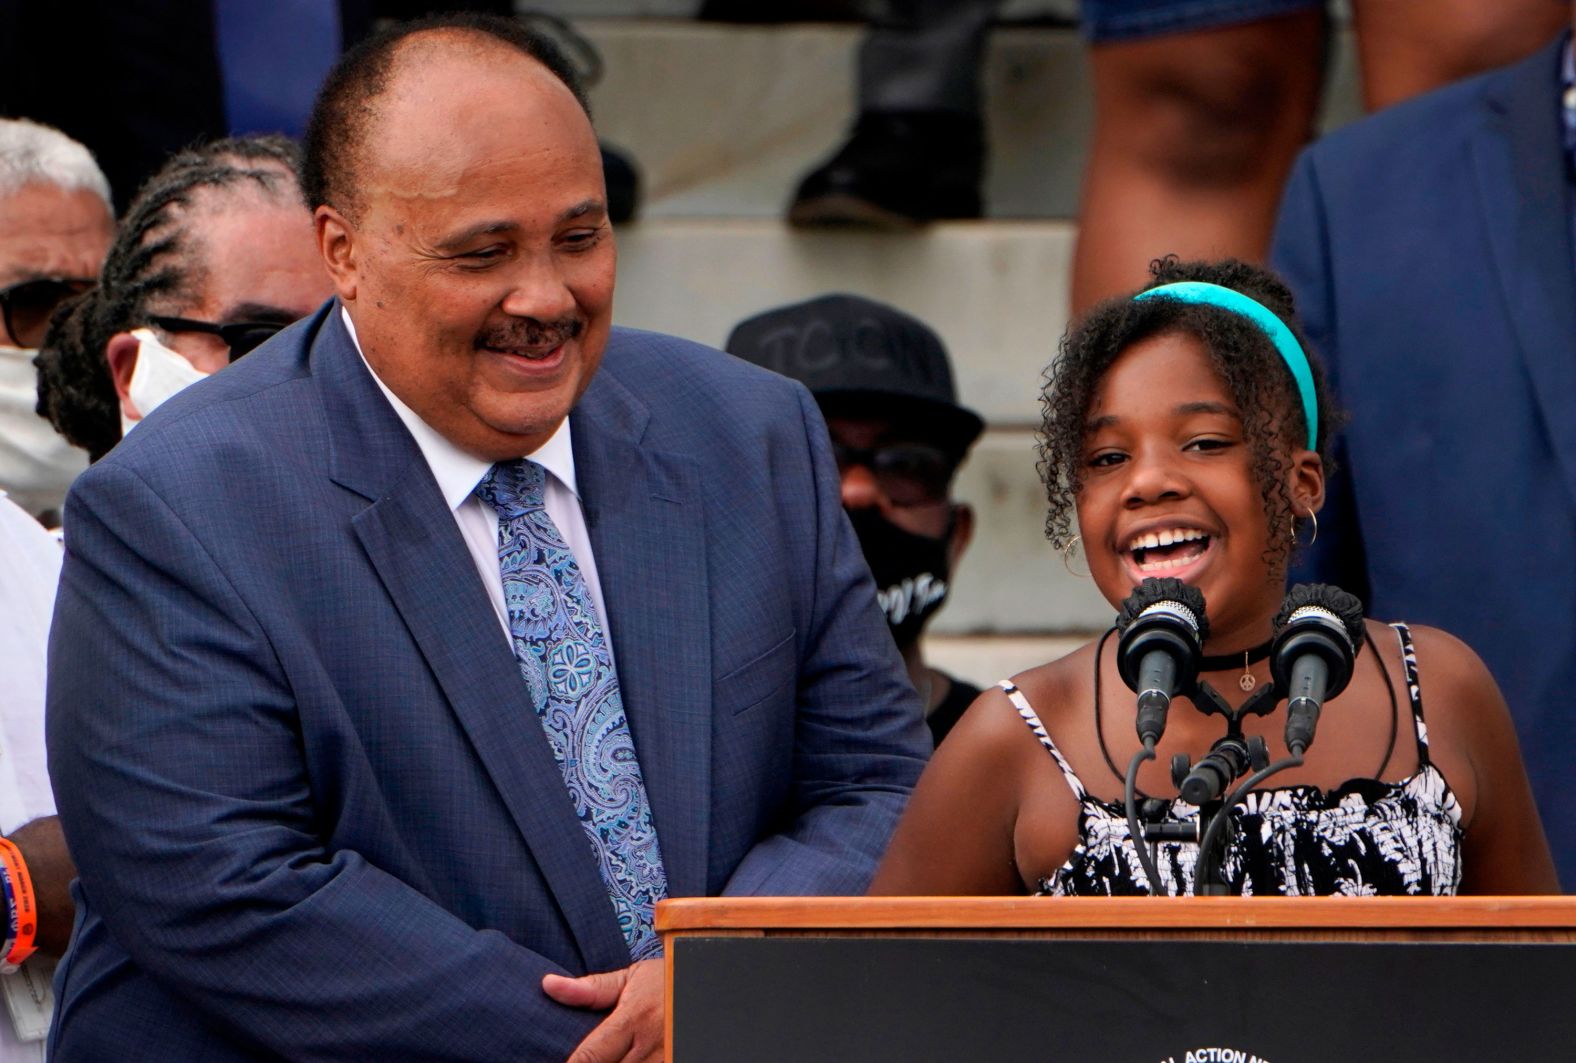 Yolanda Renee King speaks with her father, Martin Luther King III, at her side at the Lincoln Memorial. Both King III and his daughter spoke from the exact spot where their father and grandfather, Martin Luther King Jr., spoke in 1963.